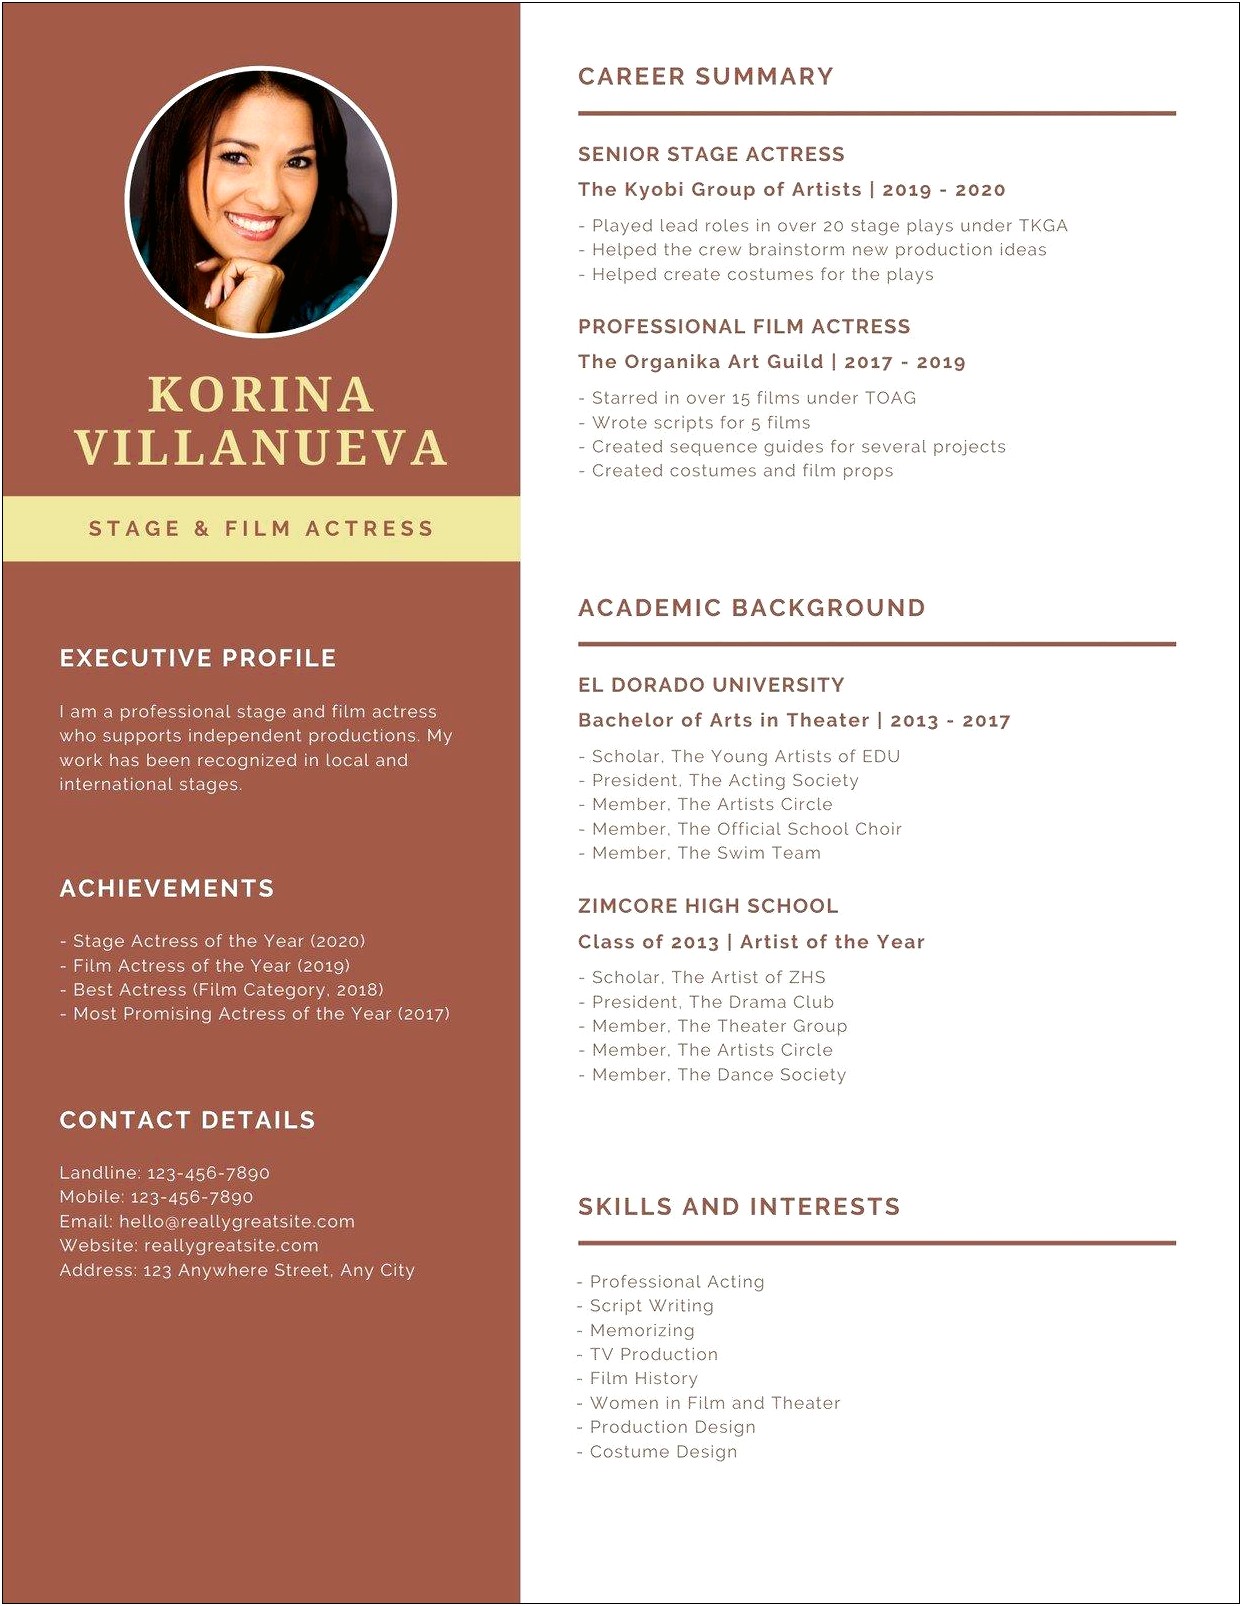 Profile Part Of A Resume Film Examples